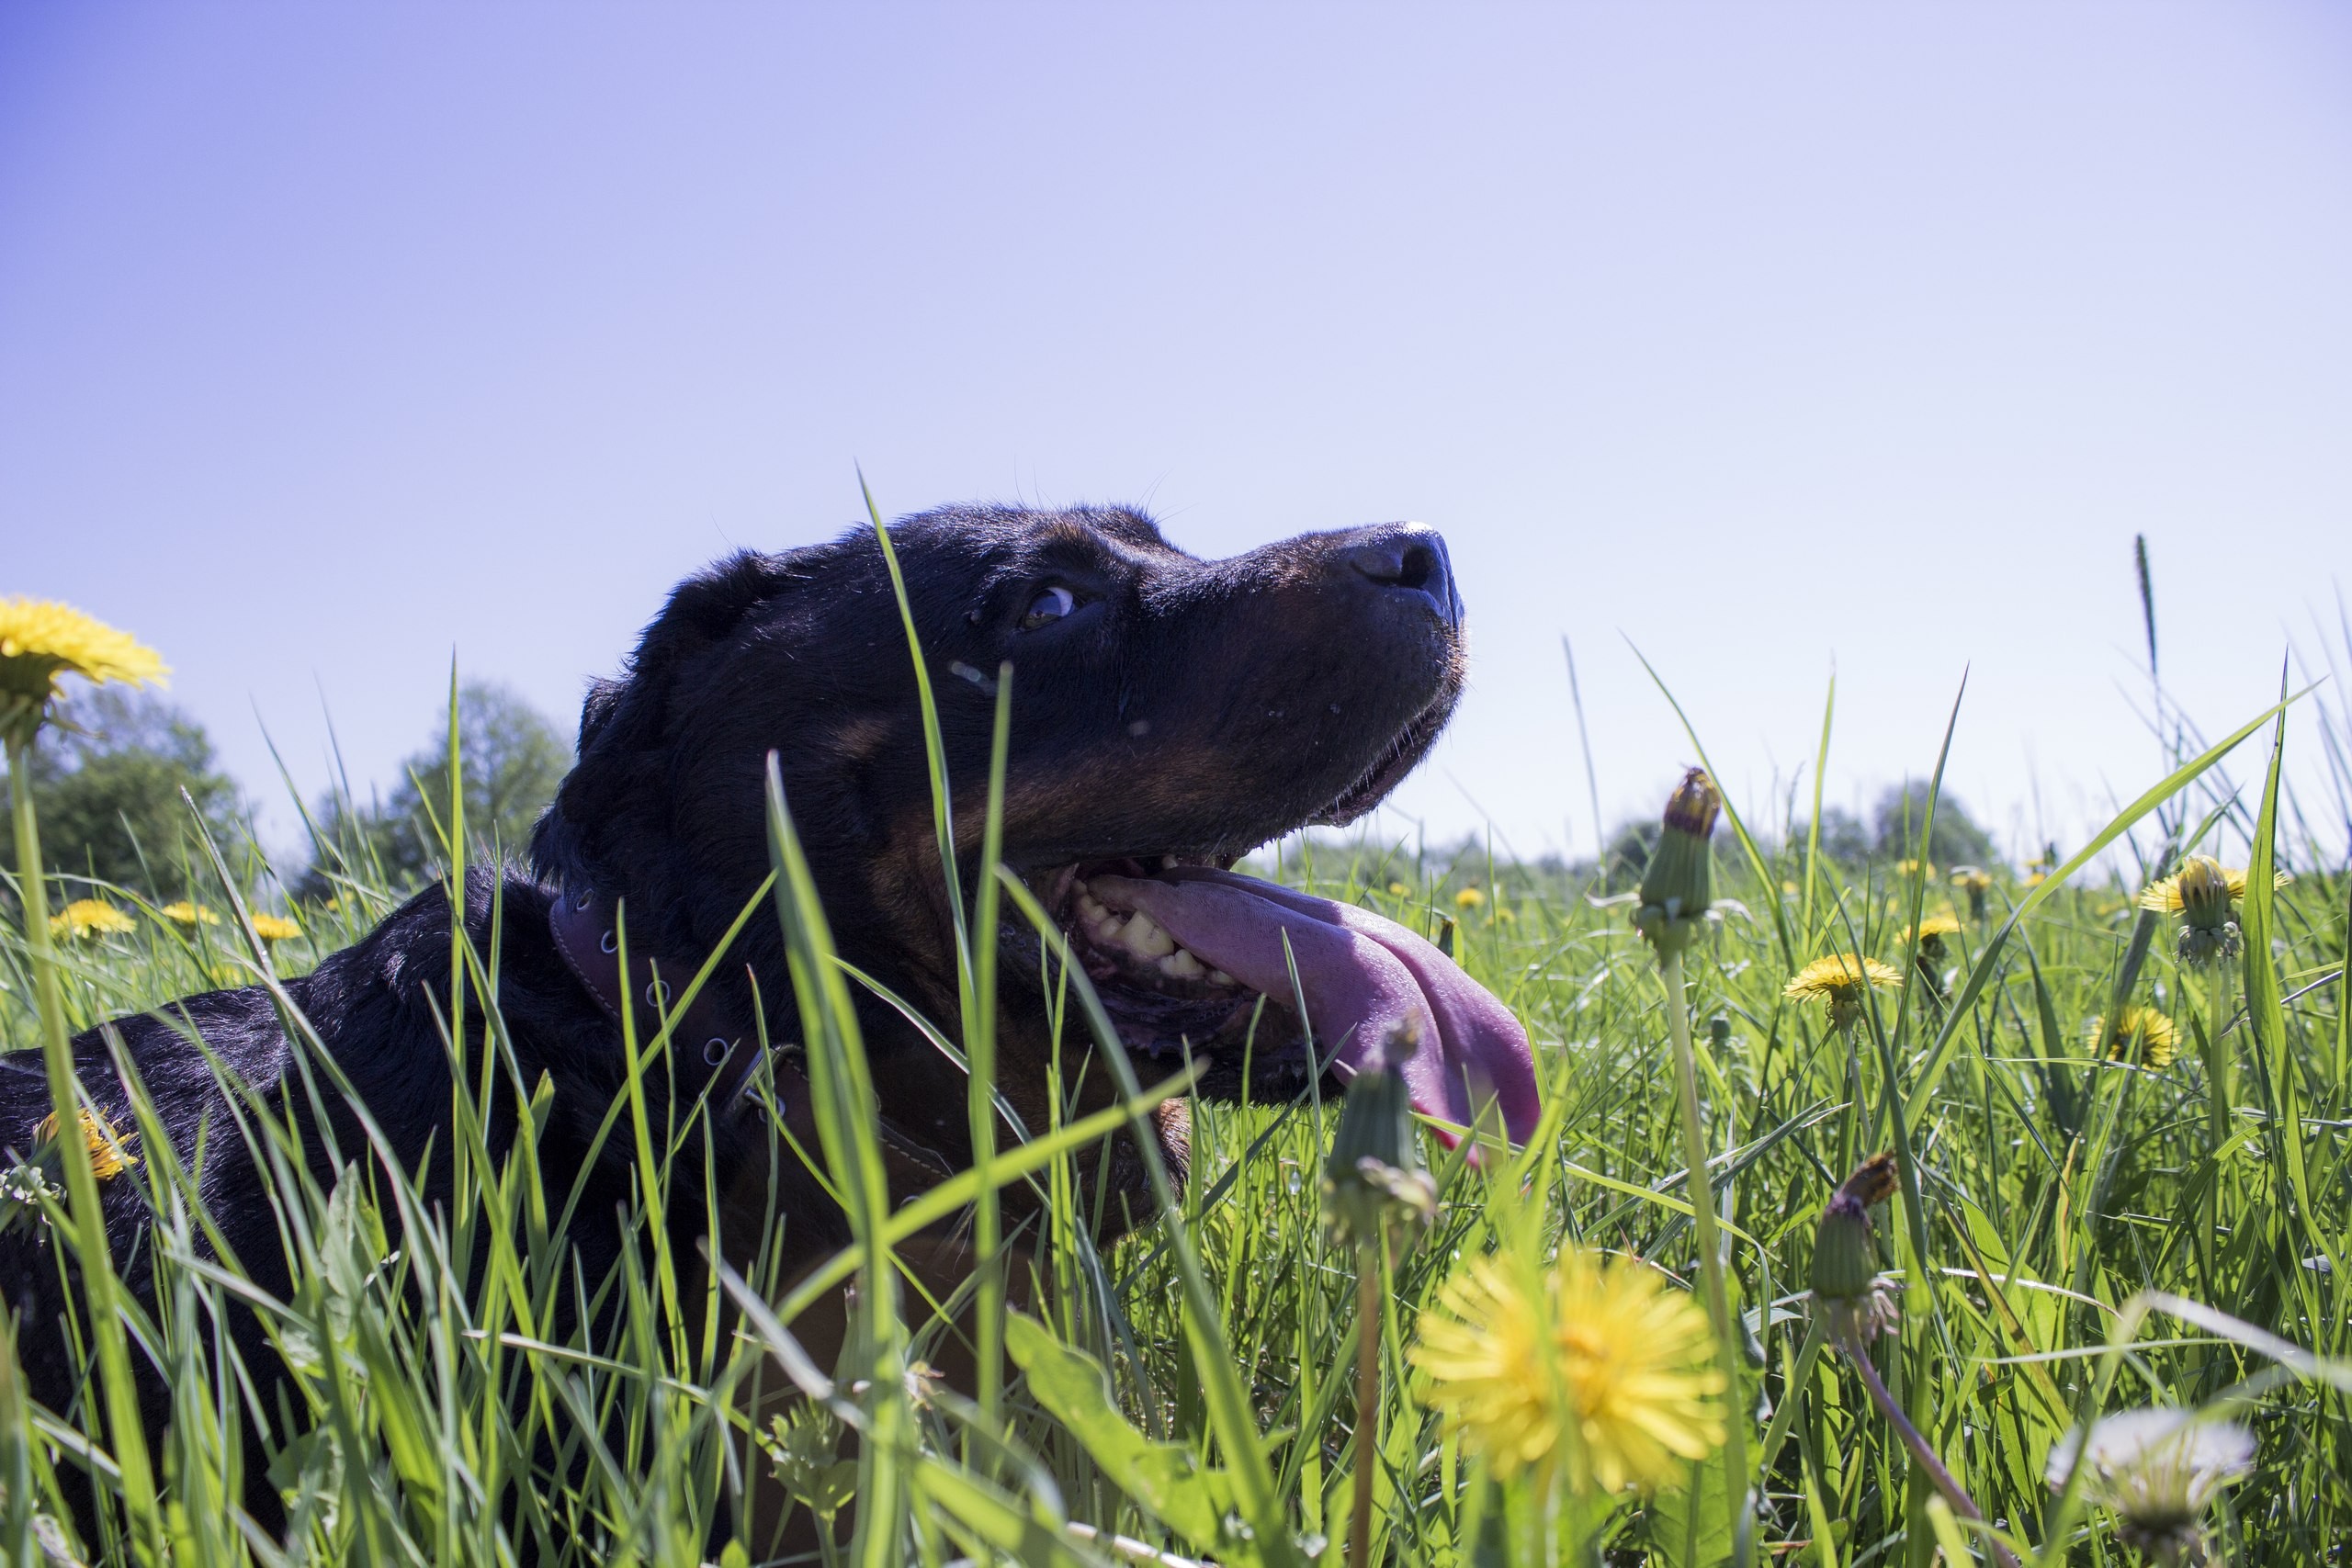 General 2560x1707 dog animals tongues grass yellow flowers dandelion plants tongue out daylight outdoors mammals